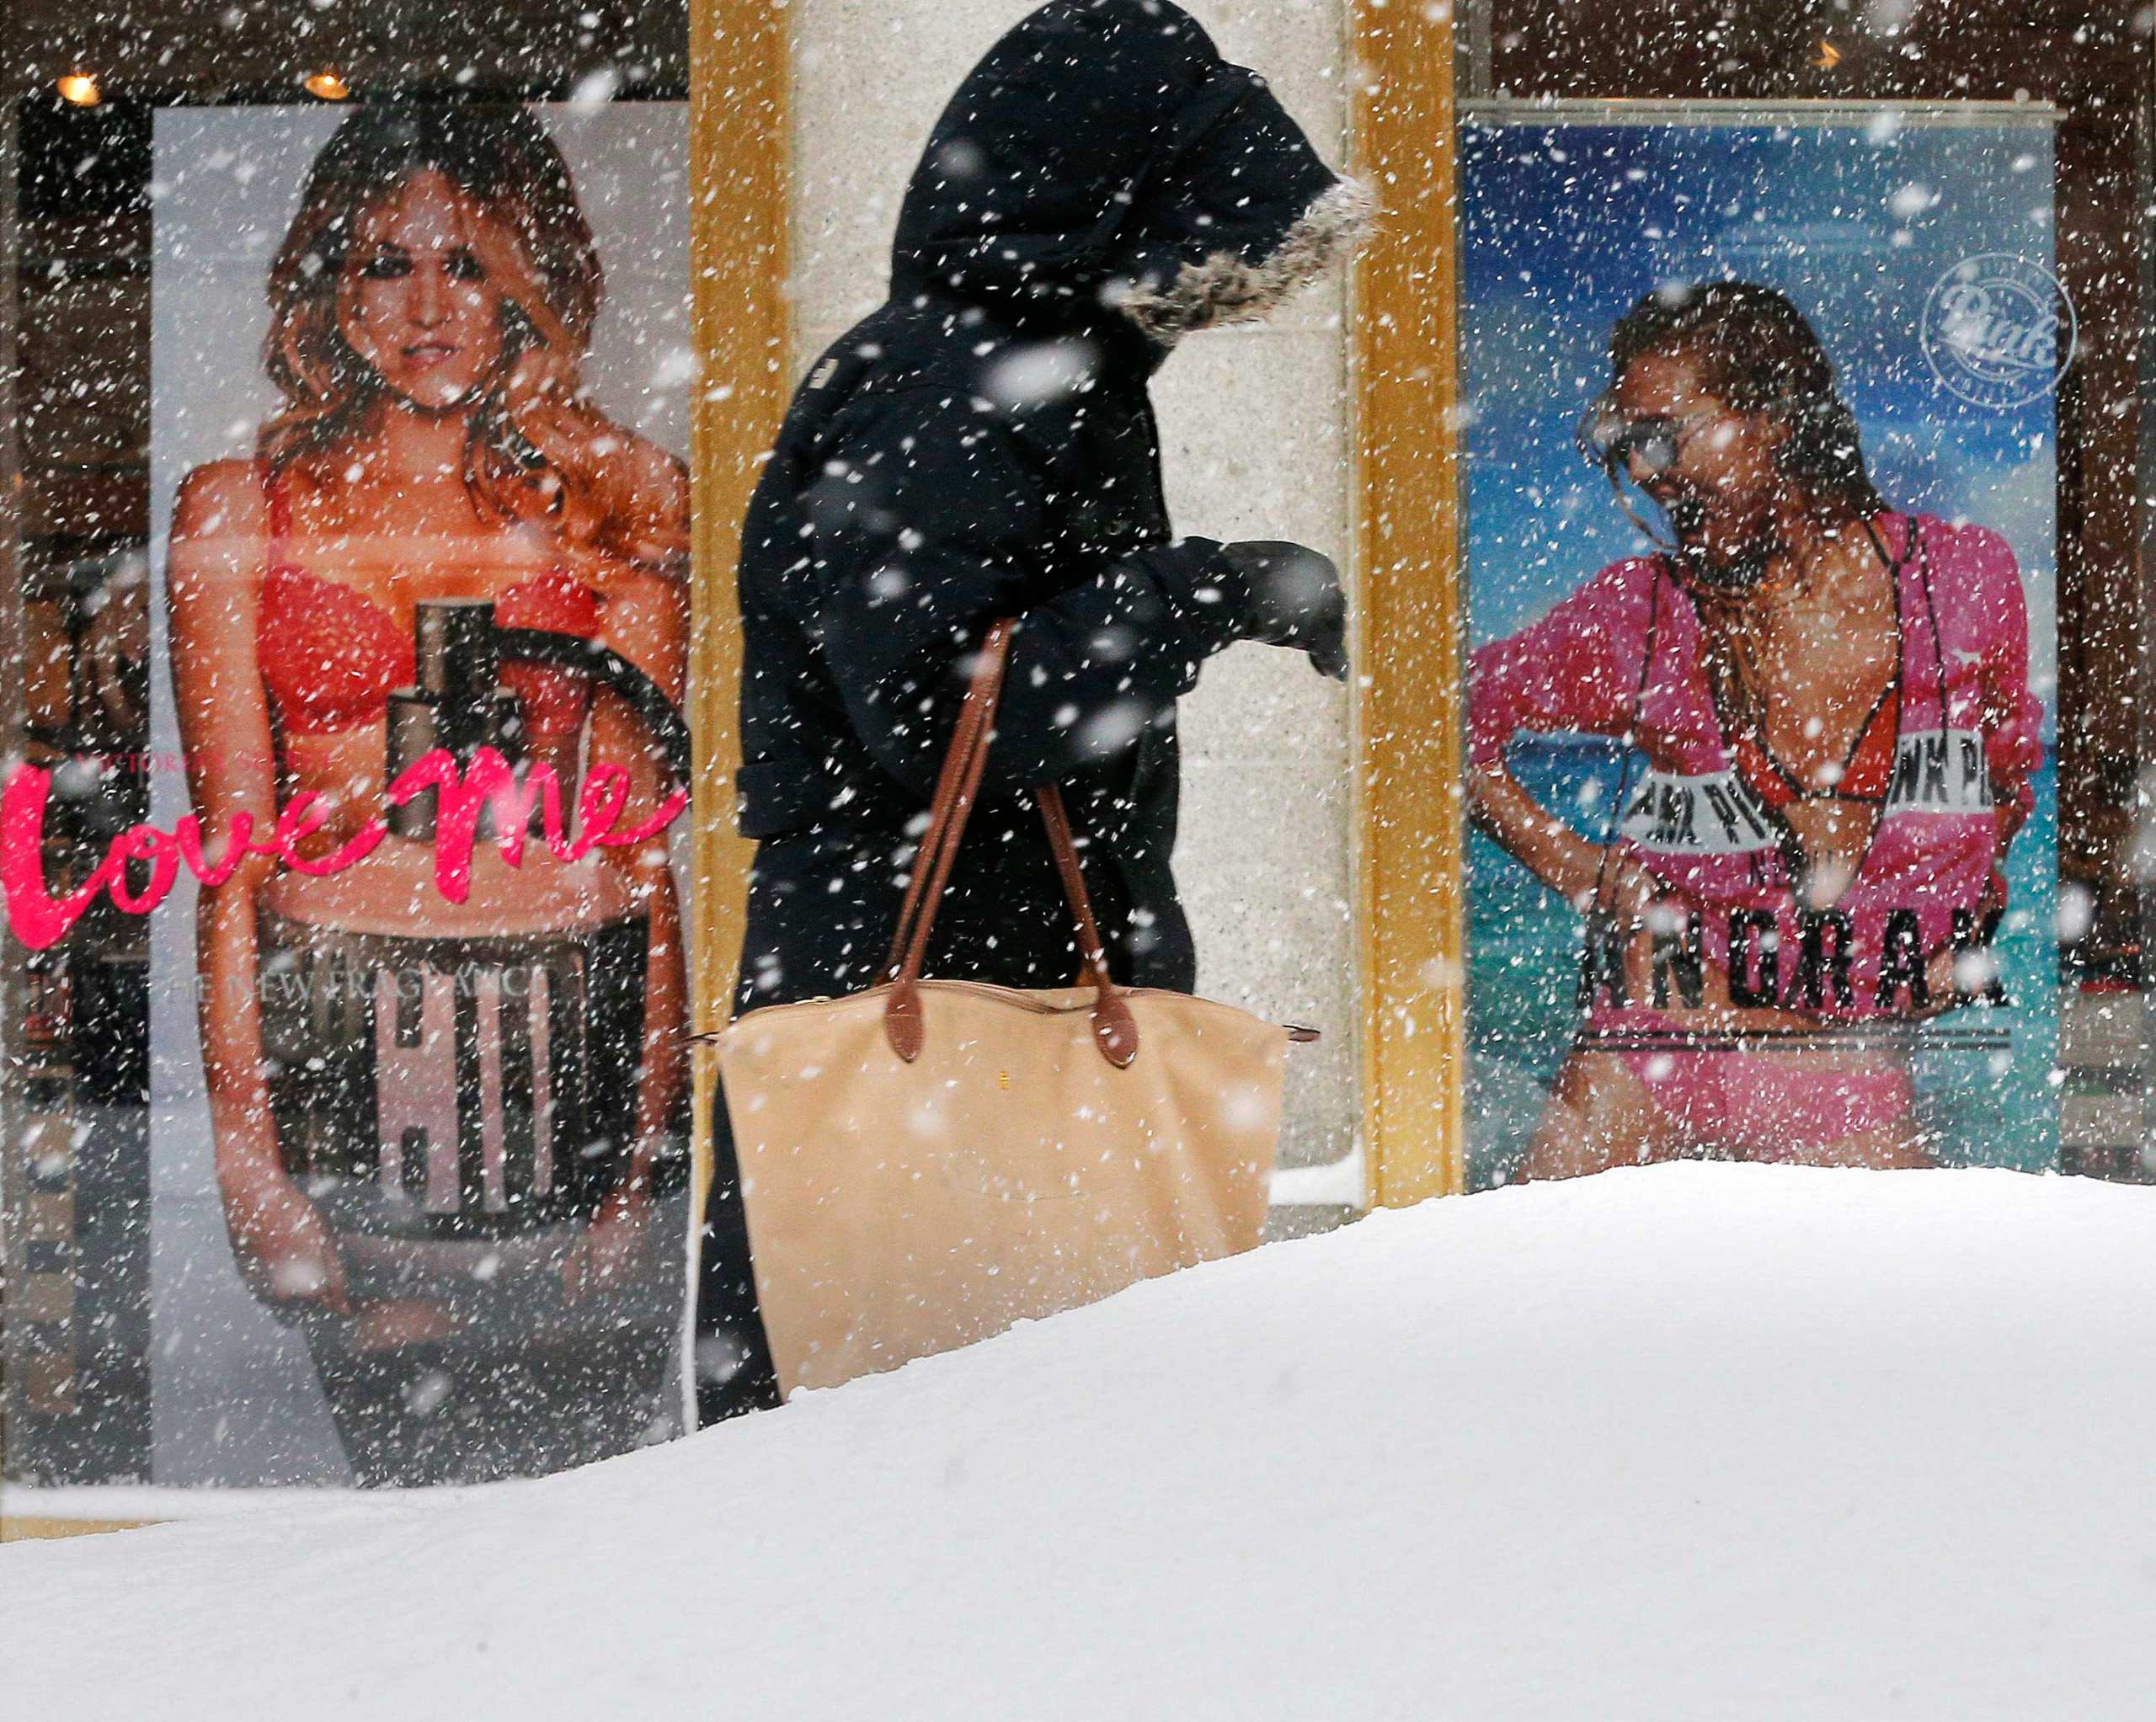 A pedestrian makes her way past a Victoria's Secret store along a snow covered street during a winter snowstorm in Boston on Feb. 9, 2015.